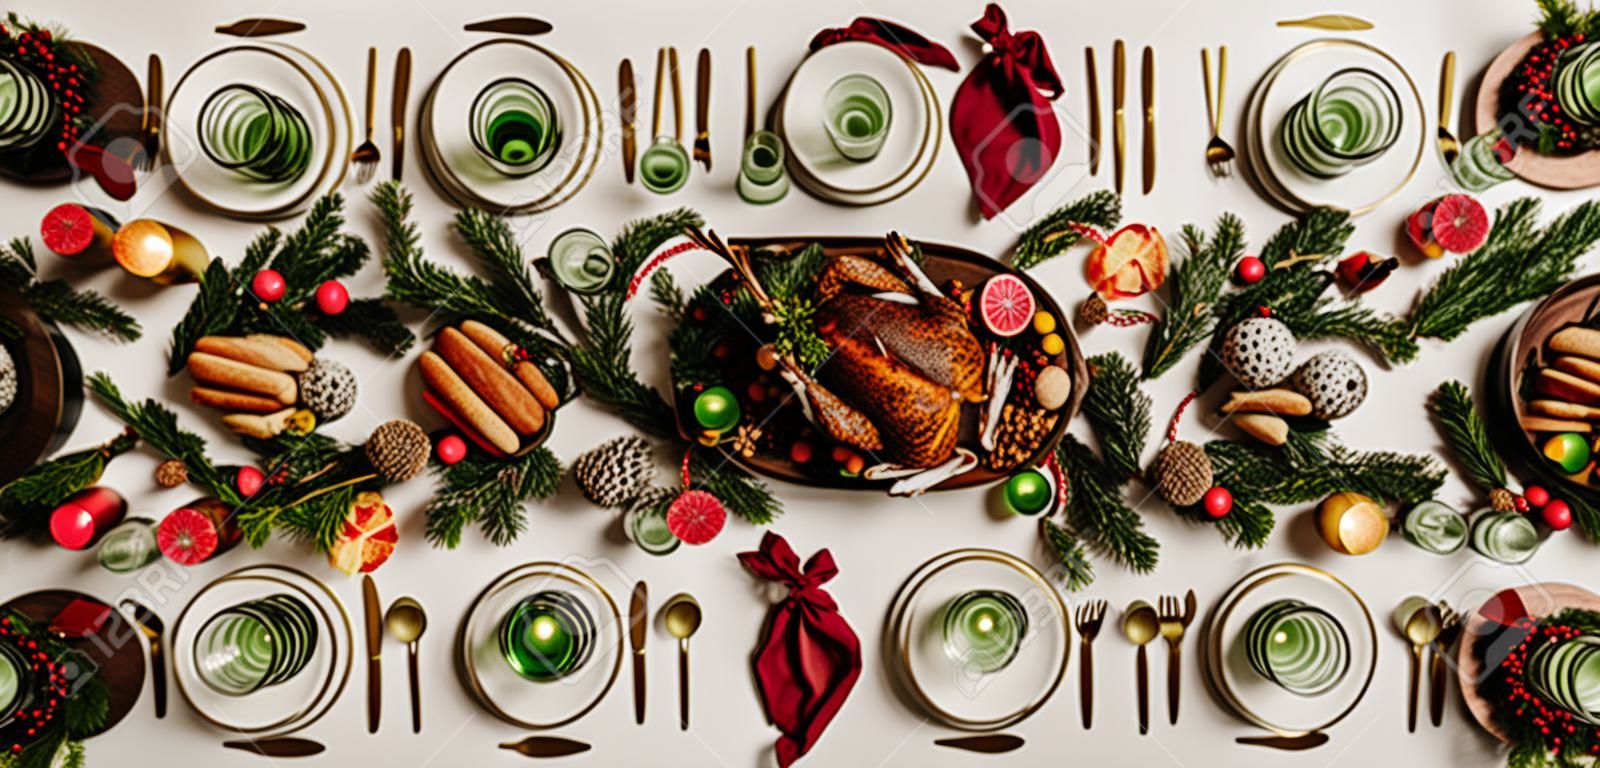 Flat-lay of Festive Christmas table setting over white background